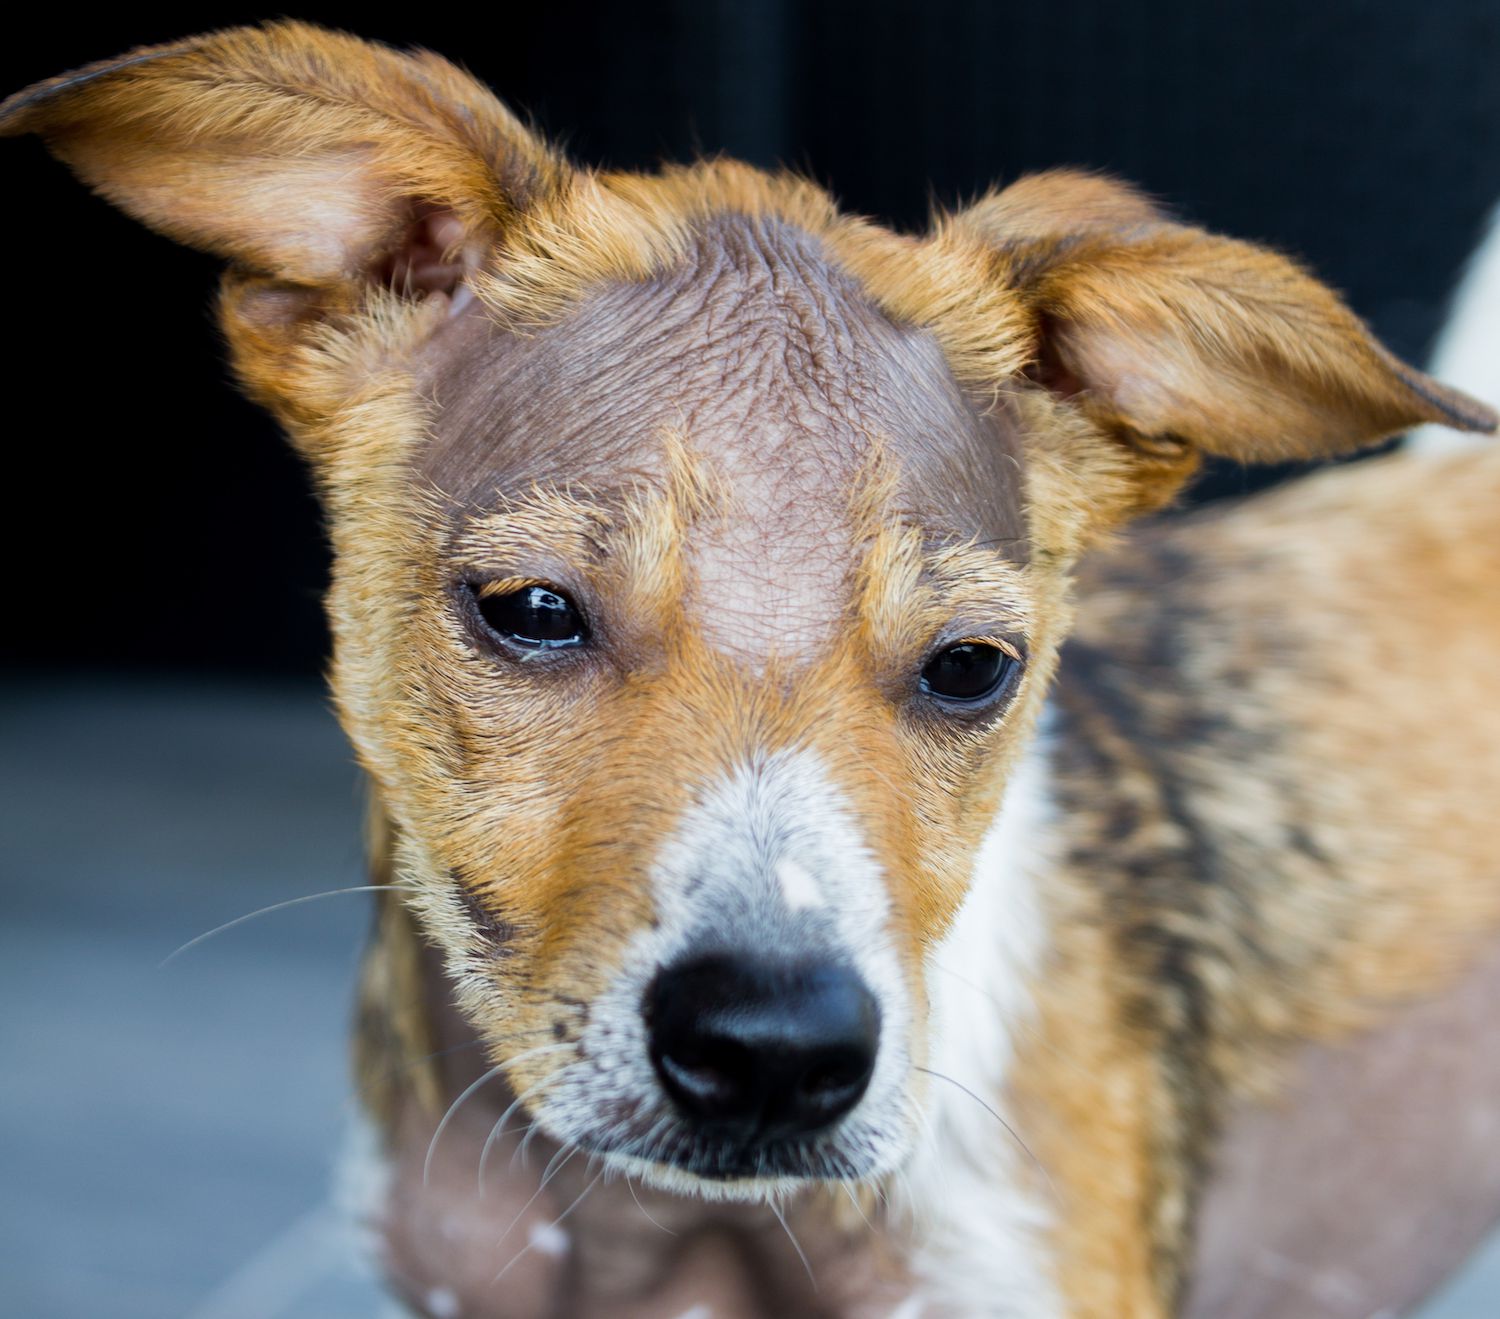 What can cause alopecia in dogs?